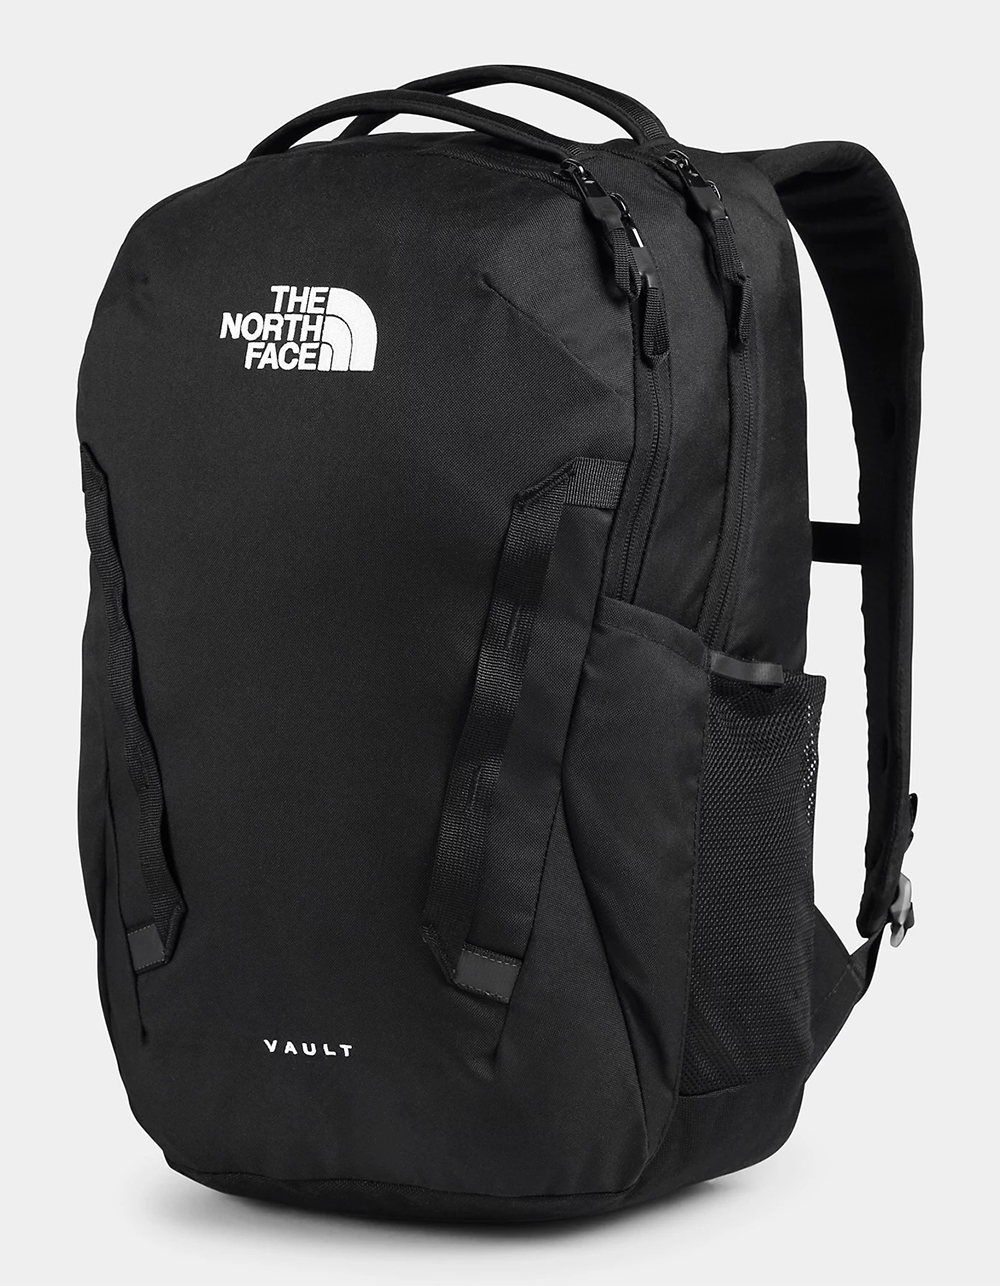 ▷ north face backpack buckle replacement 3d models 【 STLFinder 】